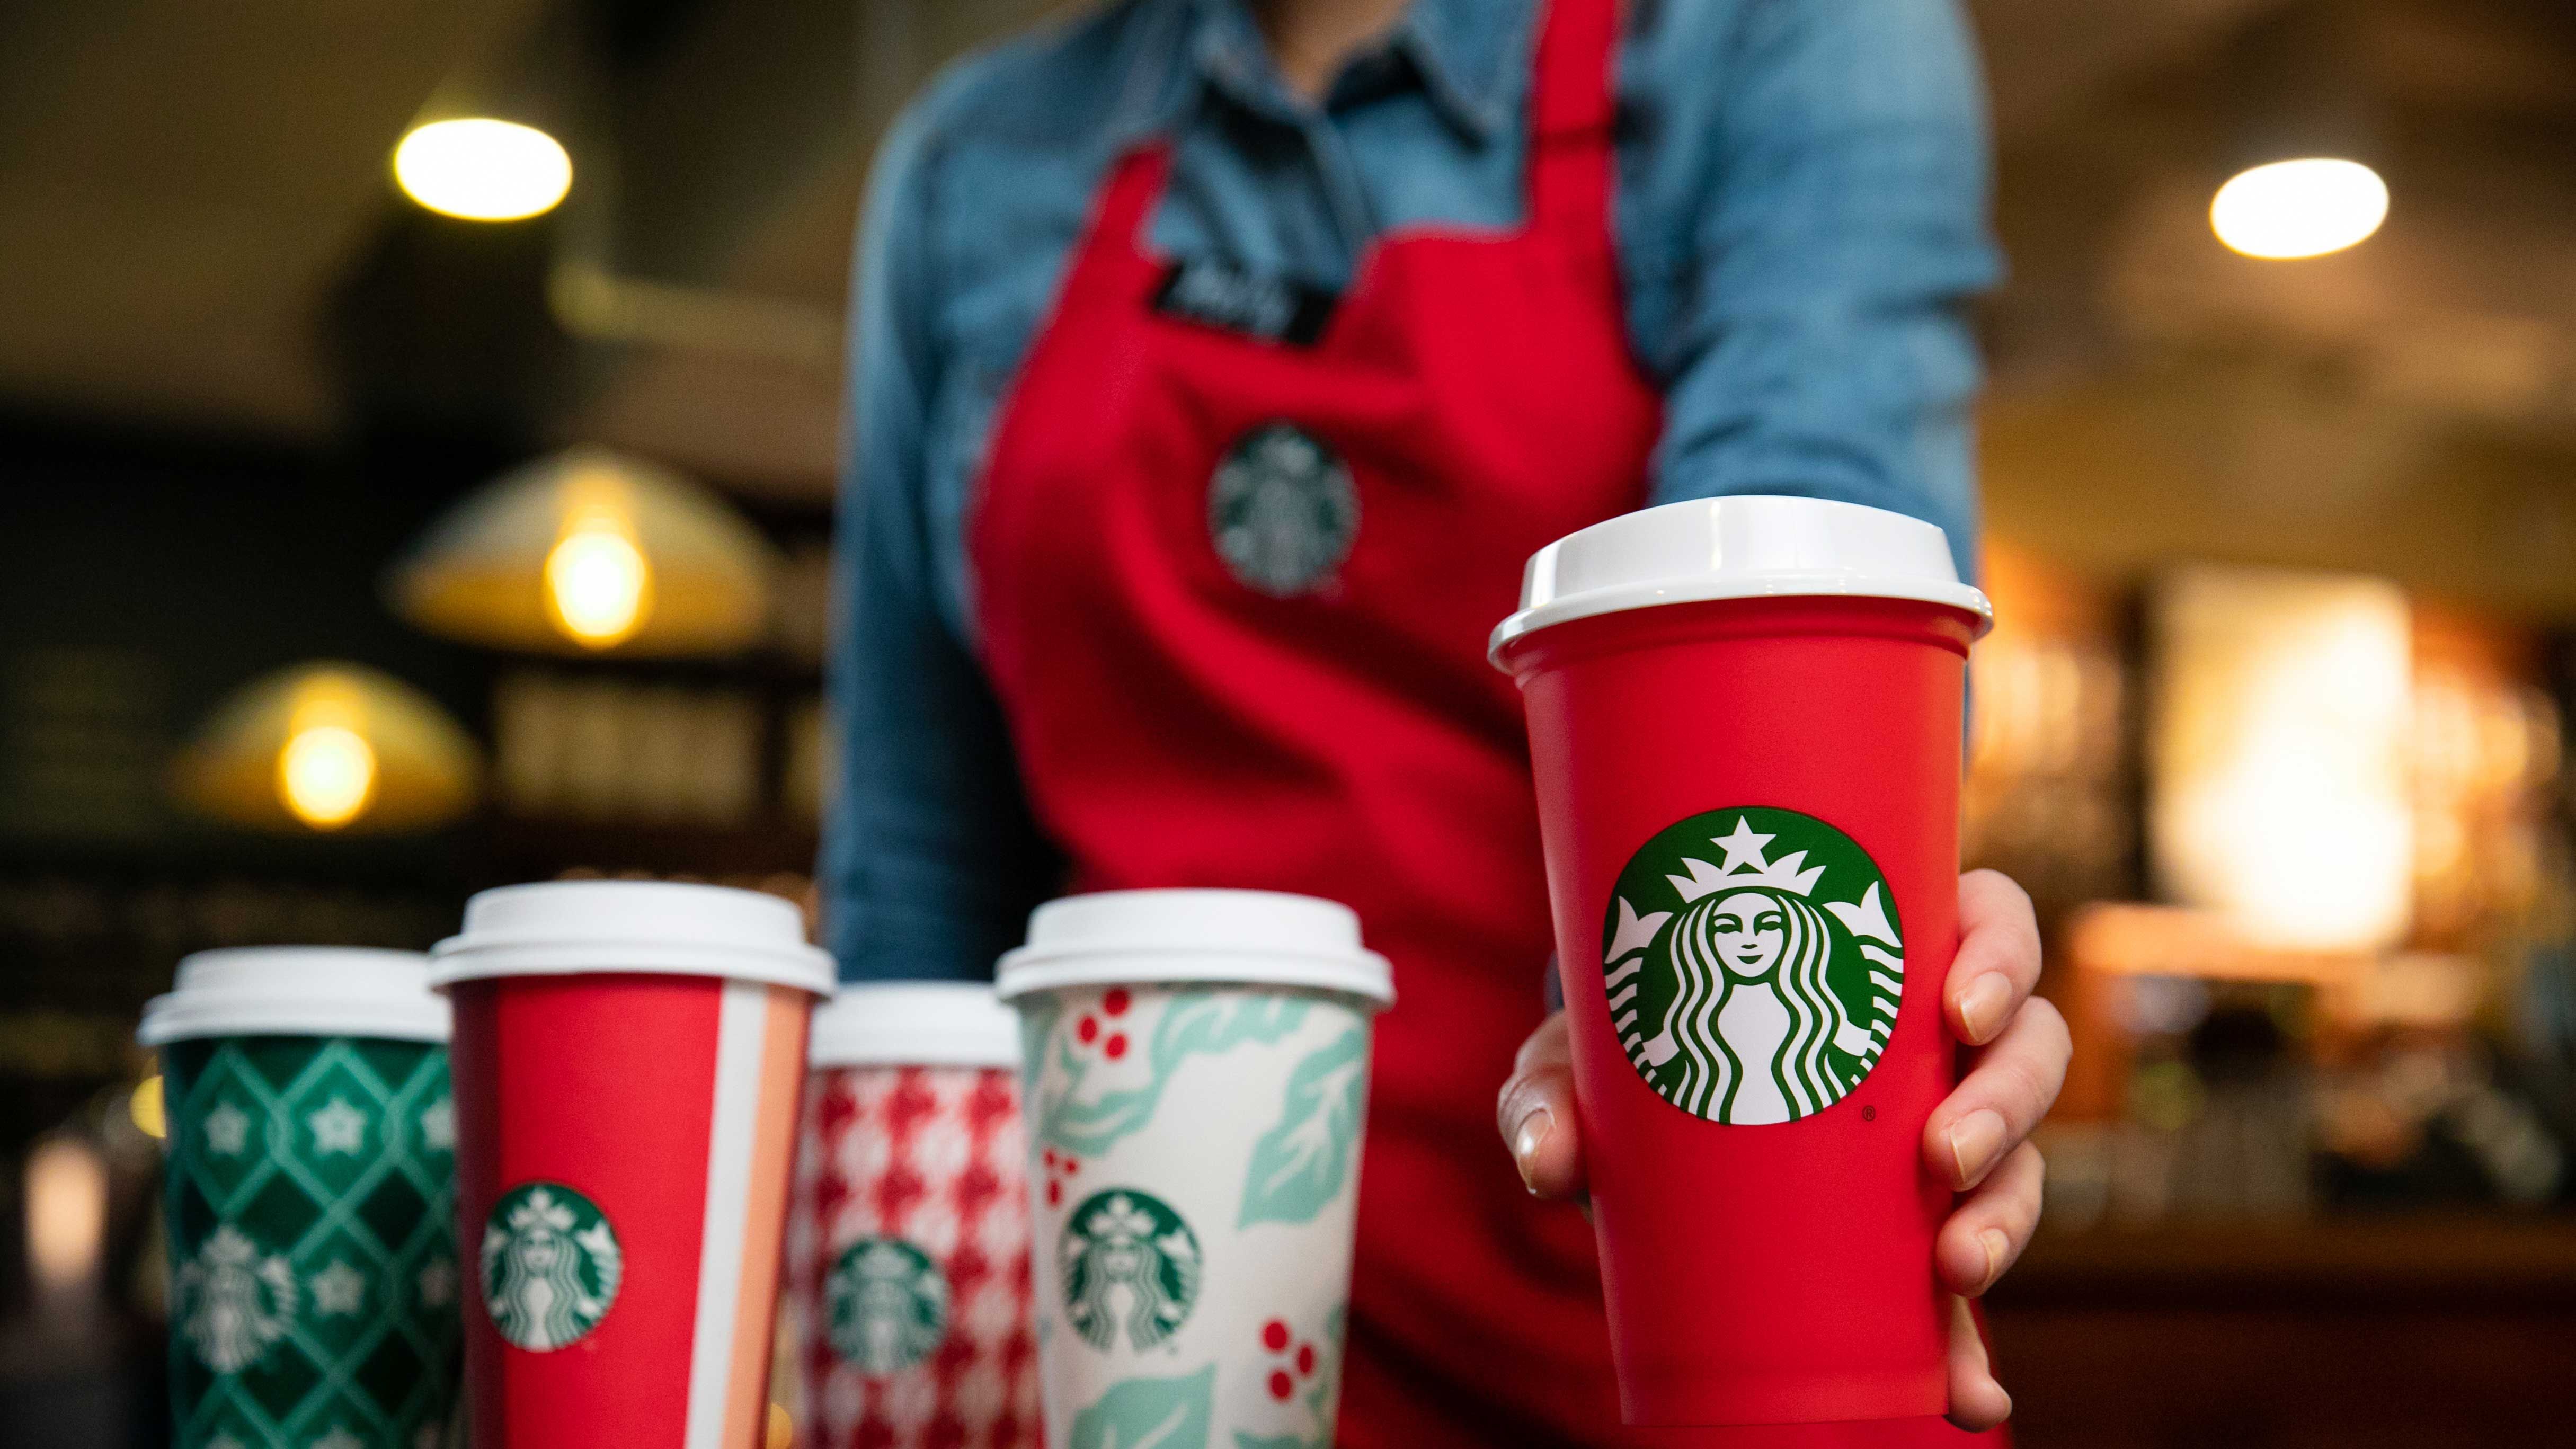 https://hips.hearstapps.com/hmg-prod/images/starbucks-holiday-2018-cups-3-1541012398.jpg?crop=1xw:0.8438367787719839xh;center,top